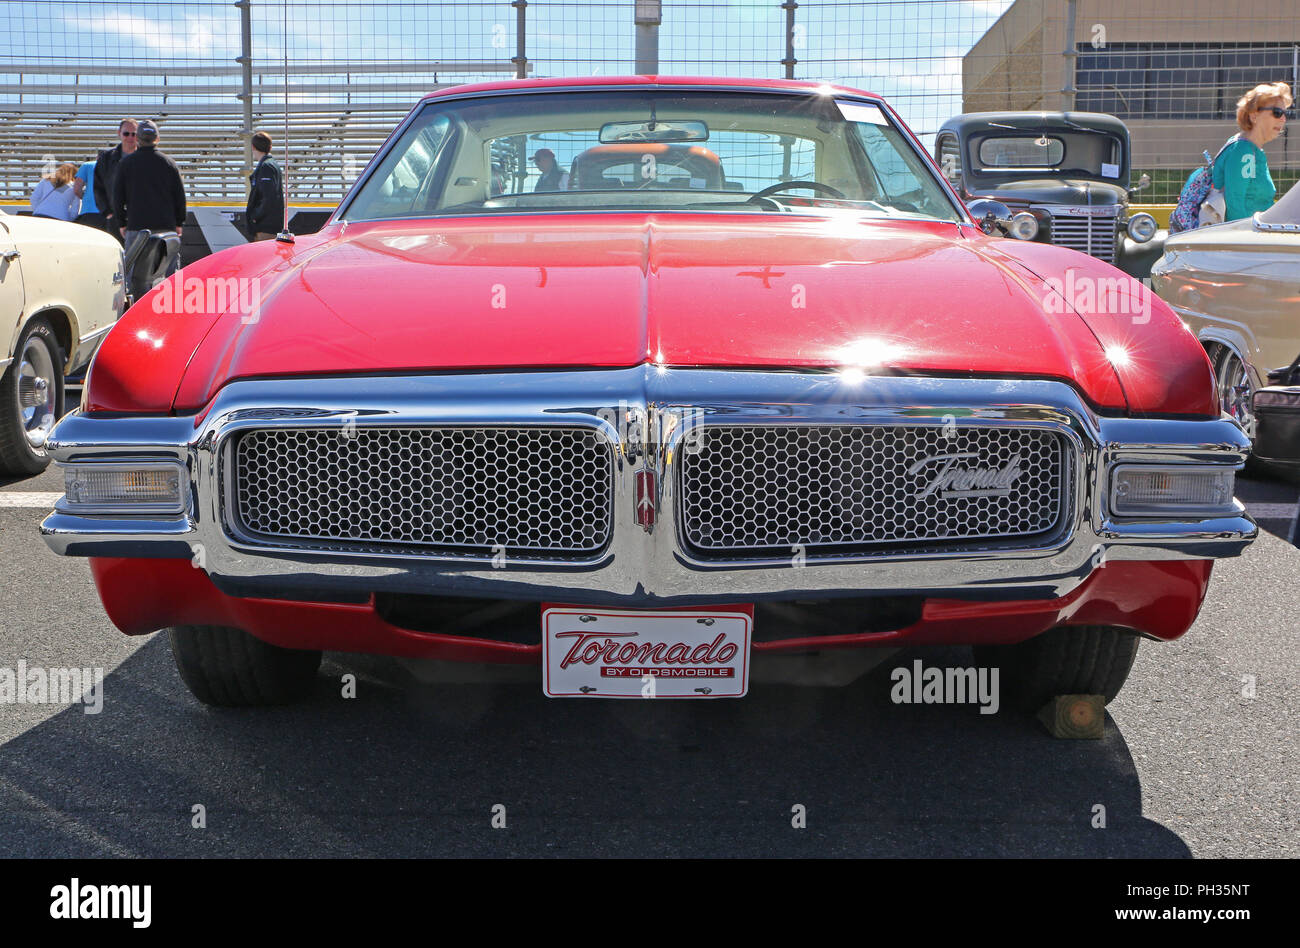 CONCORD, NC — April 8, 2017: 1968 Oldsmobile Toronado automobile on display at the Pennzoil AutoFair classic car show held at Charlotte Motor Speedway Stock Photo